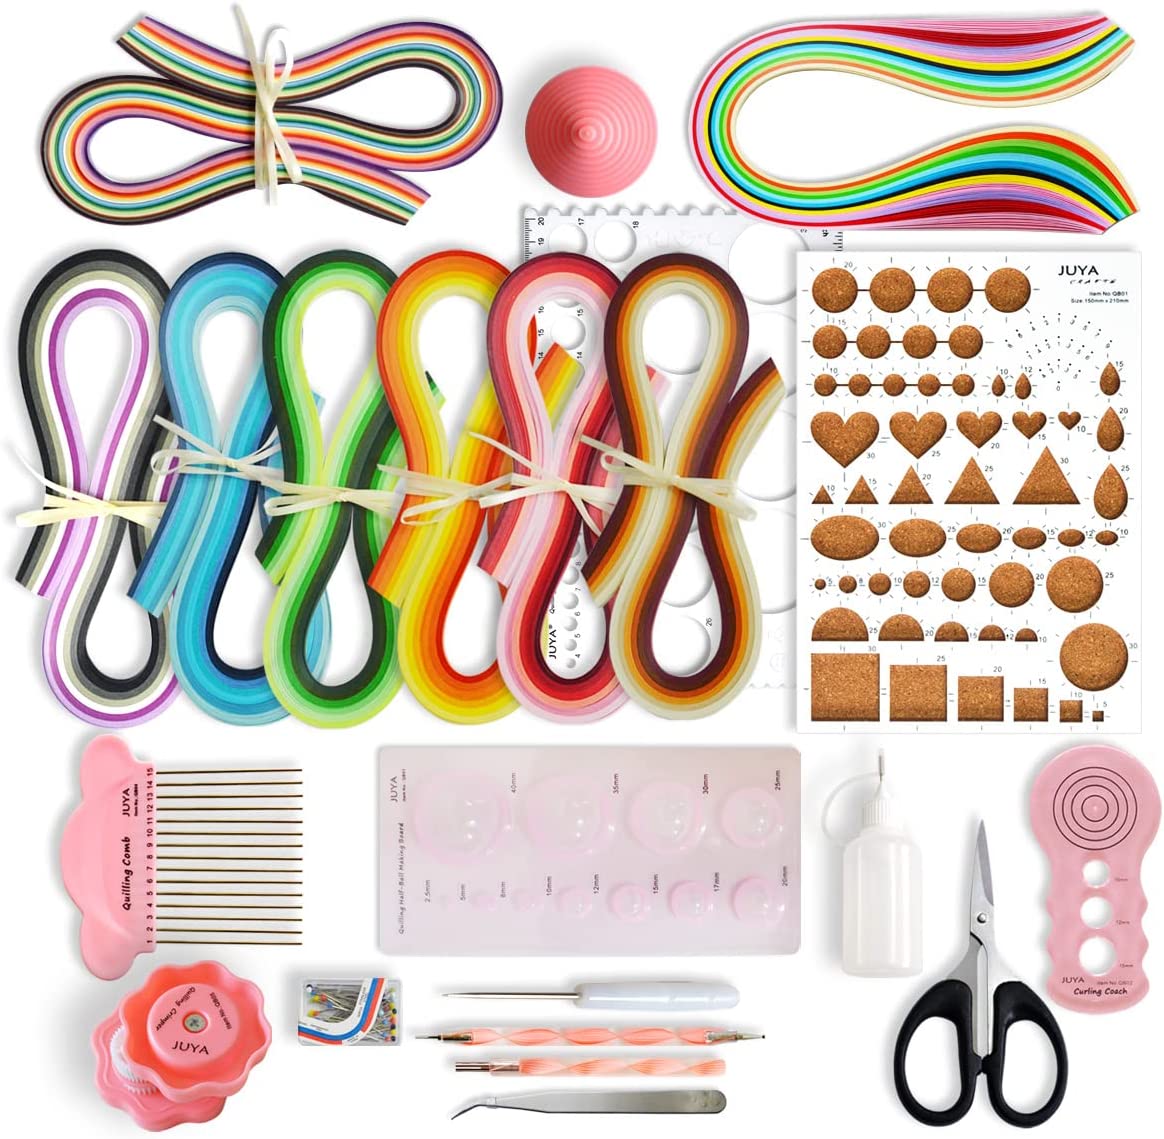 Quilled Creations Combing - Quilling Kit